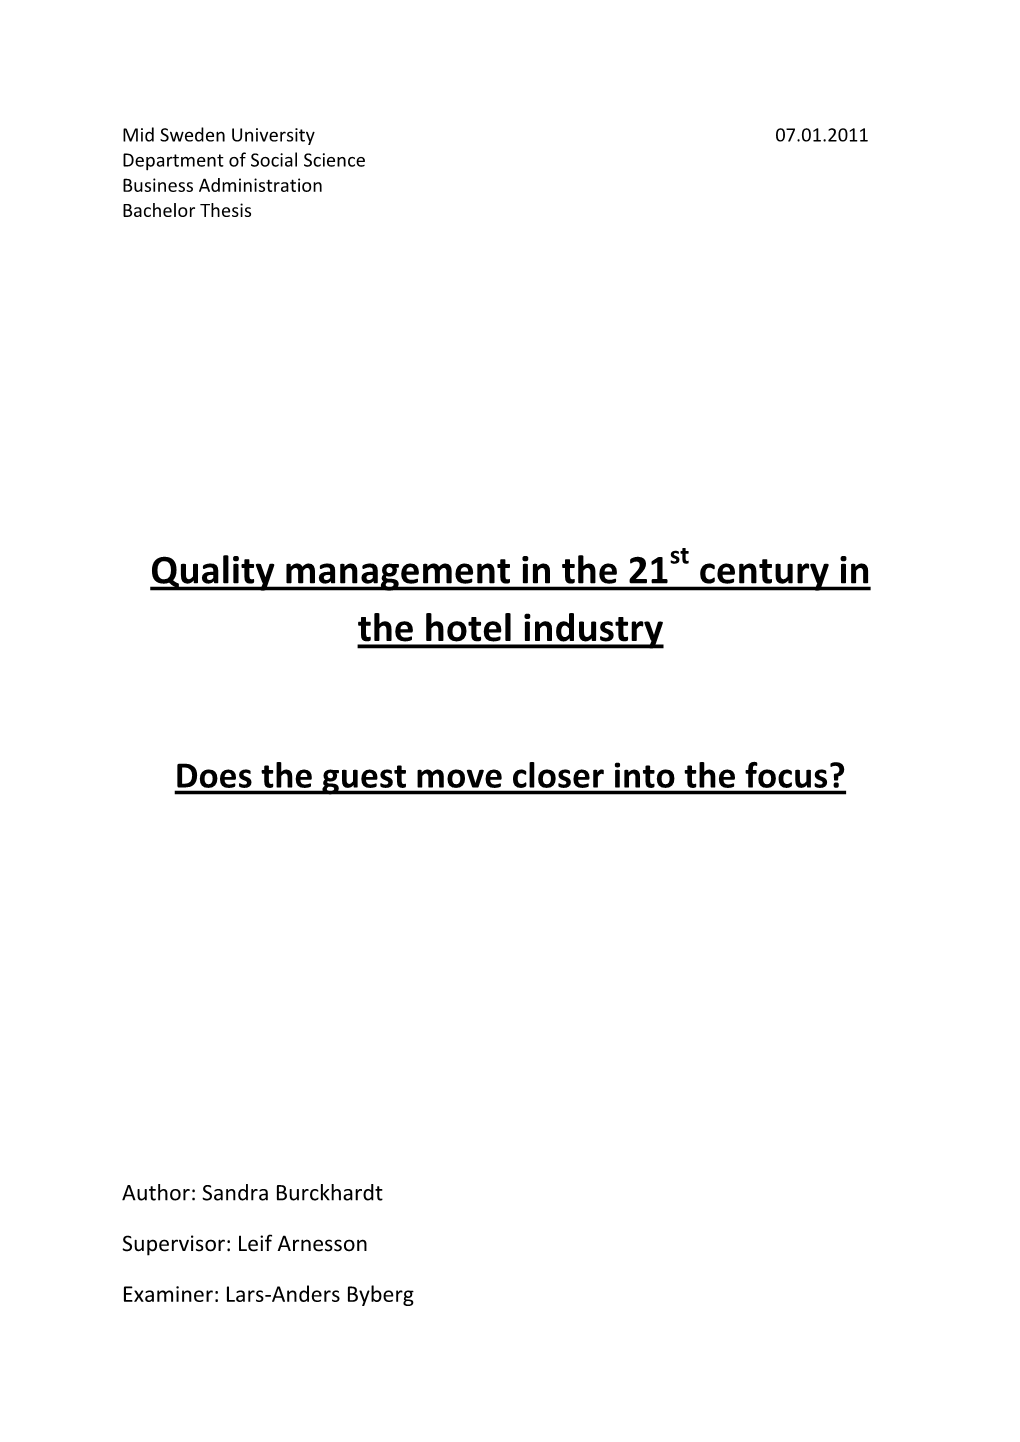 Quality Management in the 21St Century in the Hotel Industry